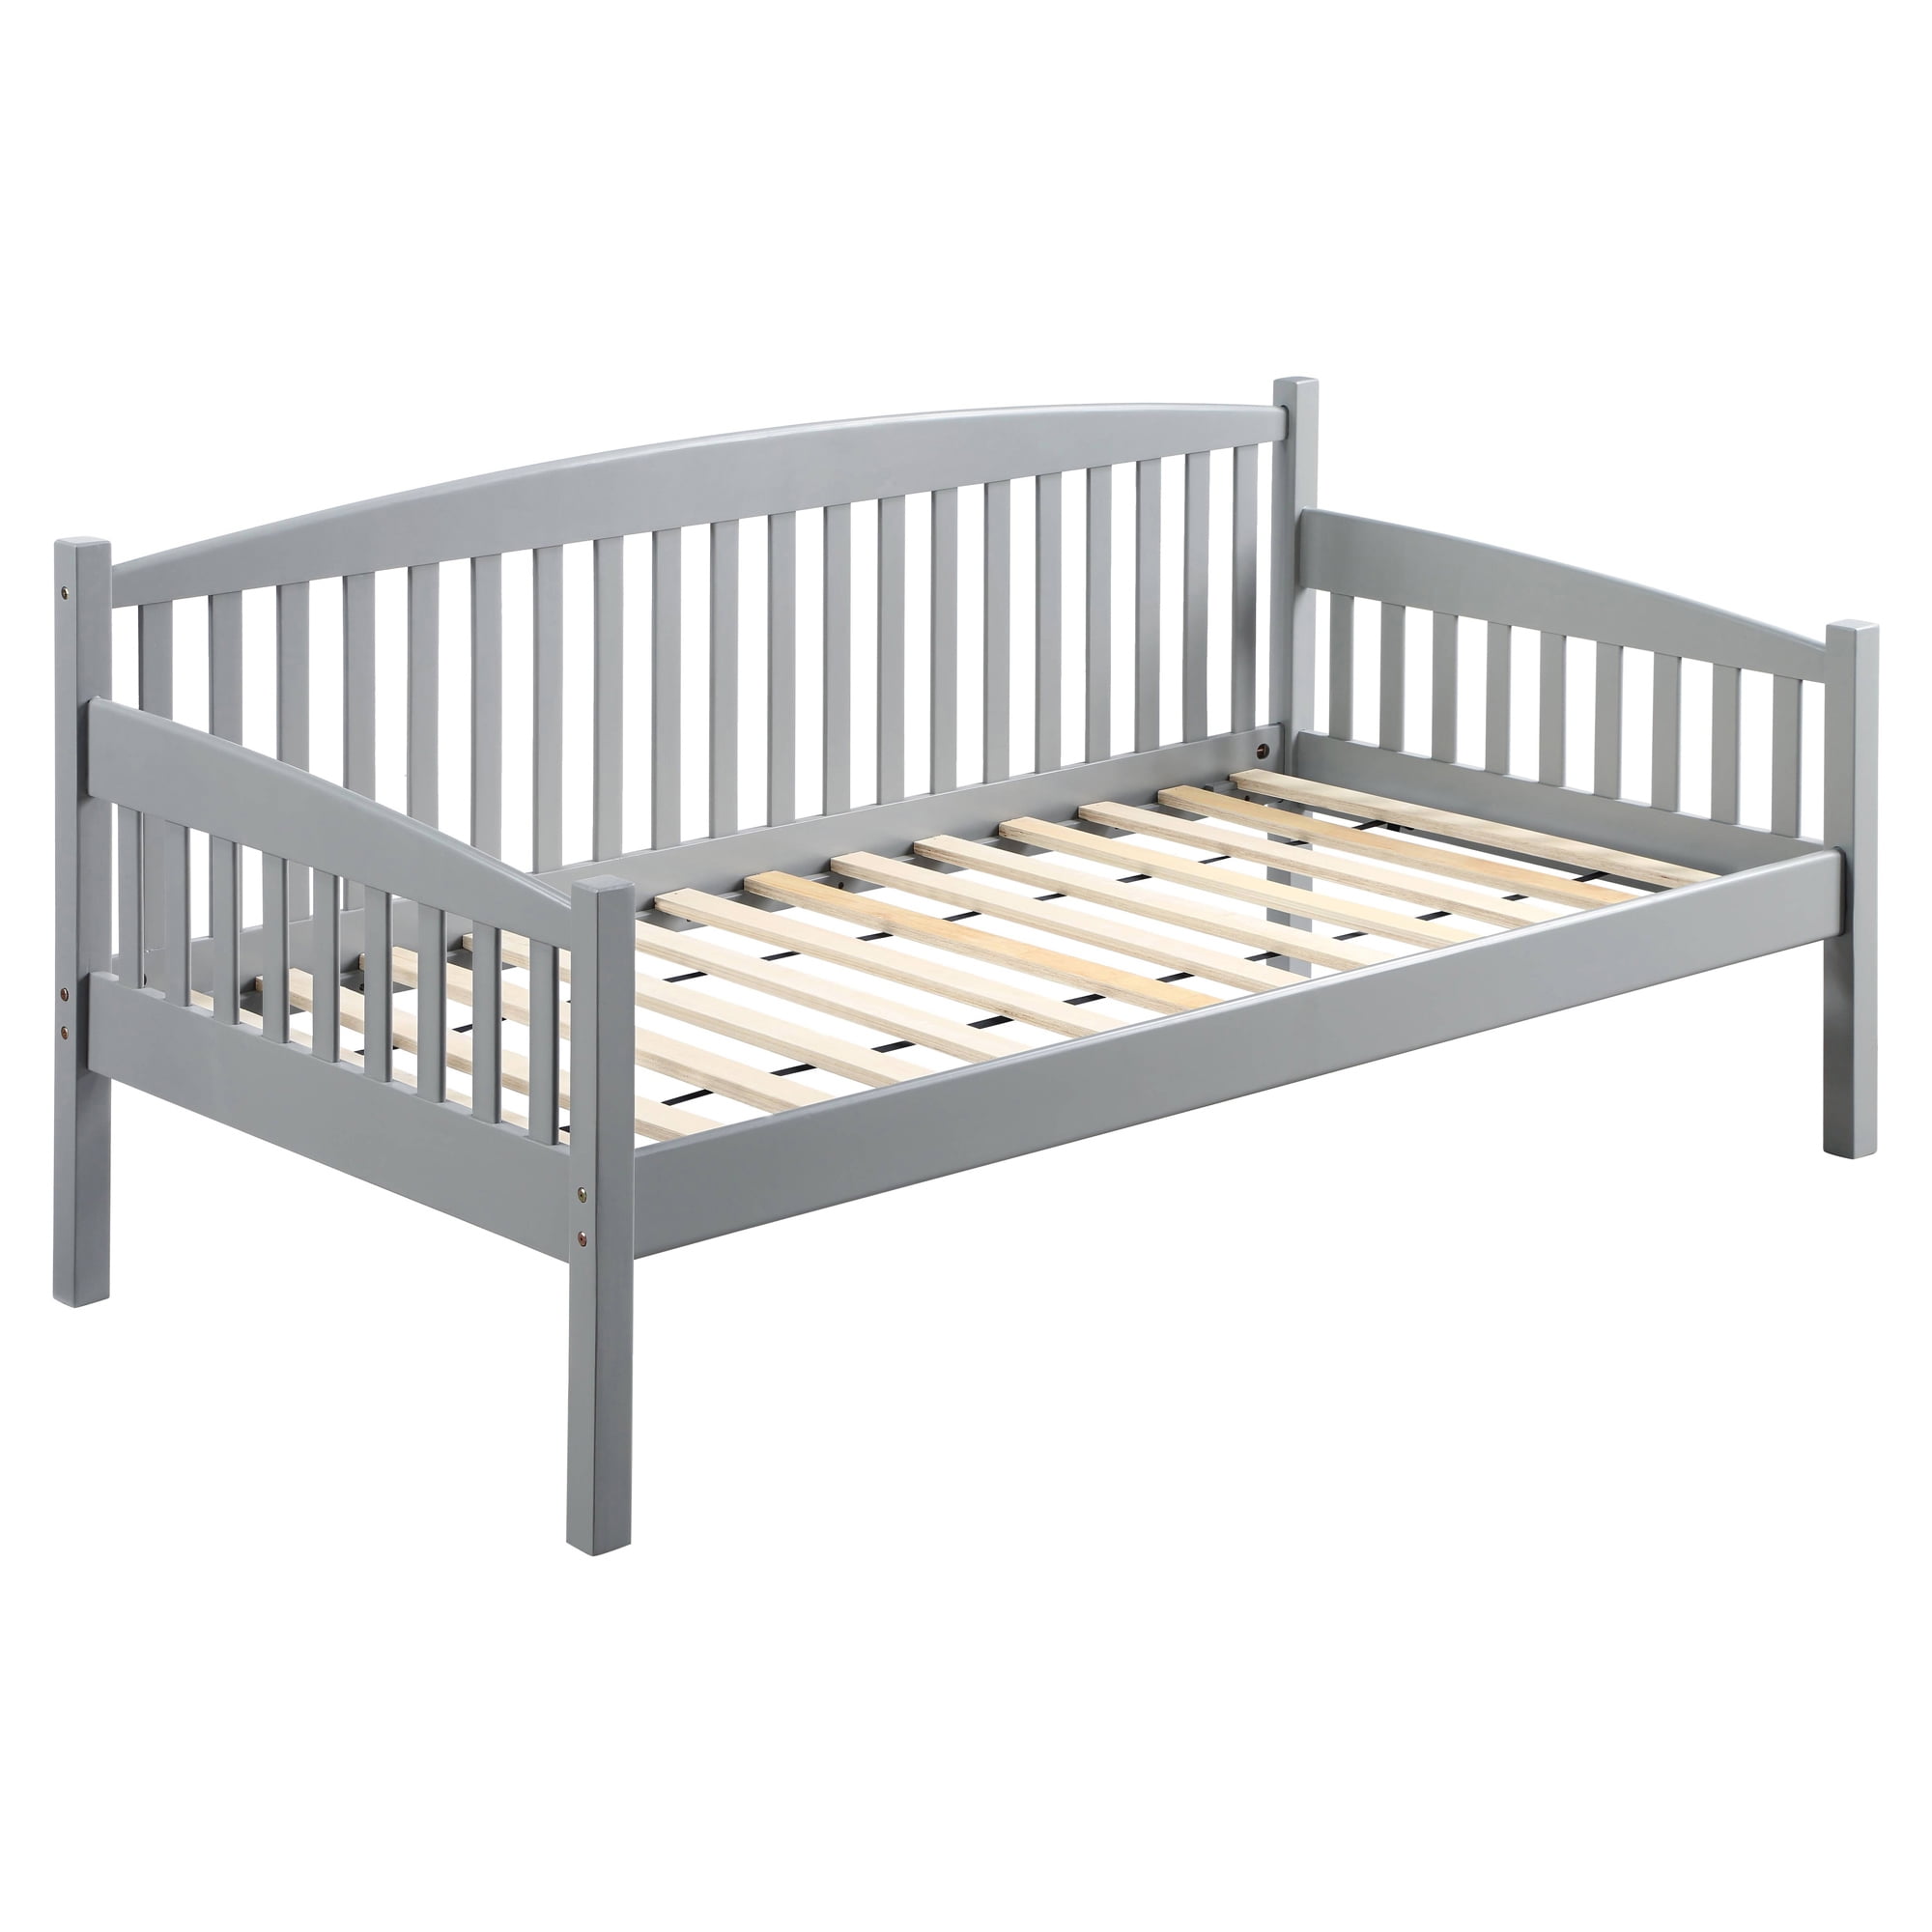 Picture of Acme Furniture BD00380 80 x 42 x 37 in. Caryn Daybed, Gray - Twin Size